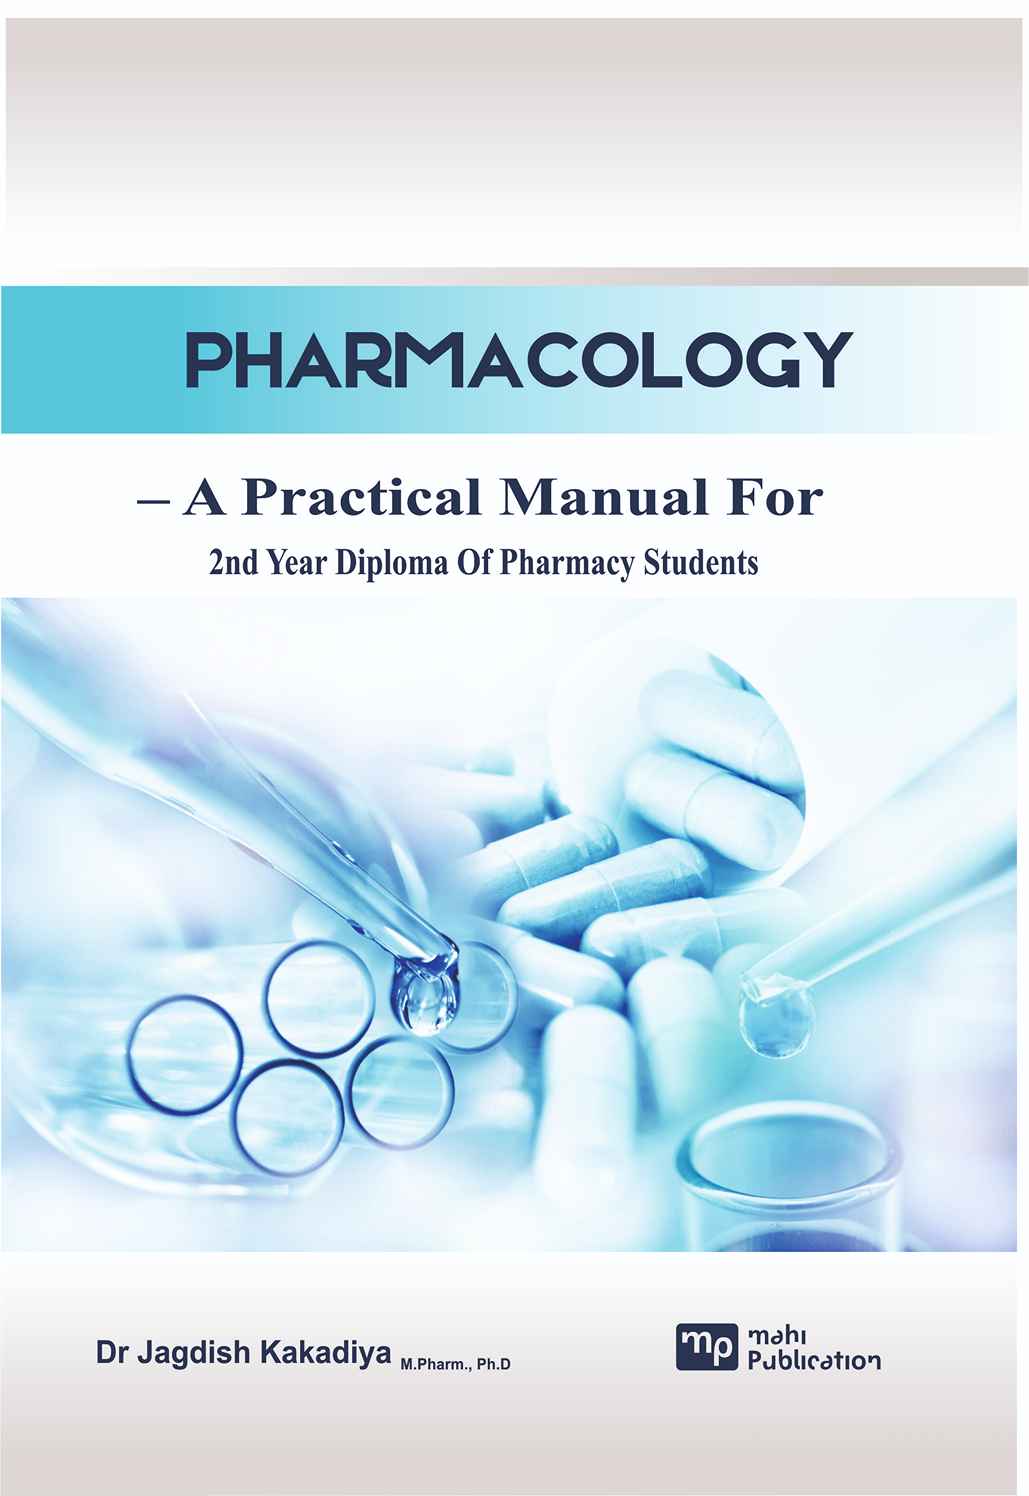 Pharmacology – A Practical Manual for 2nd Year Diploma of Pharmacy Students